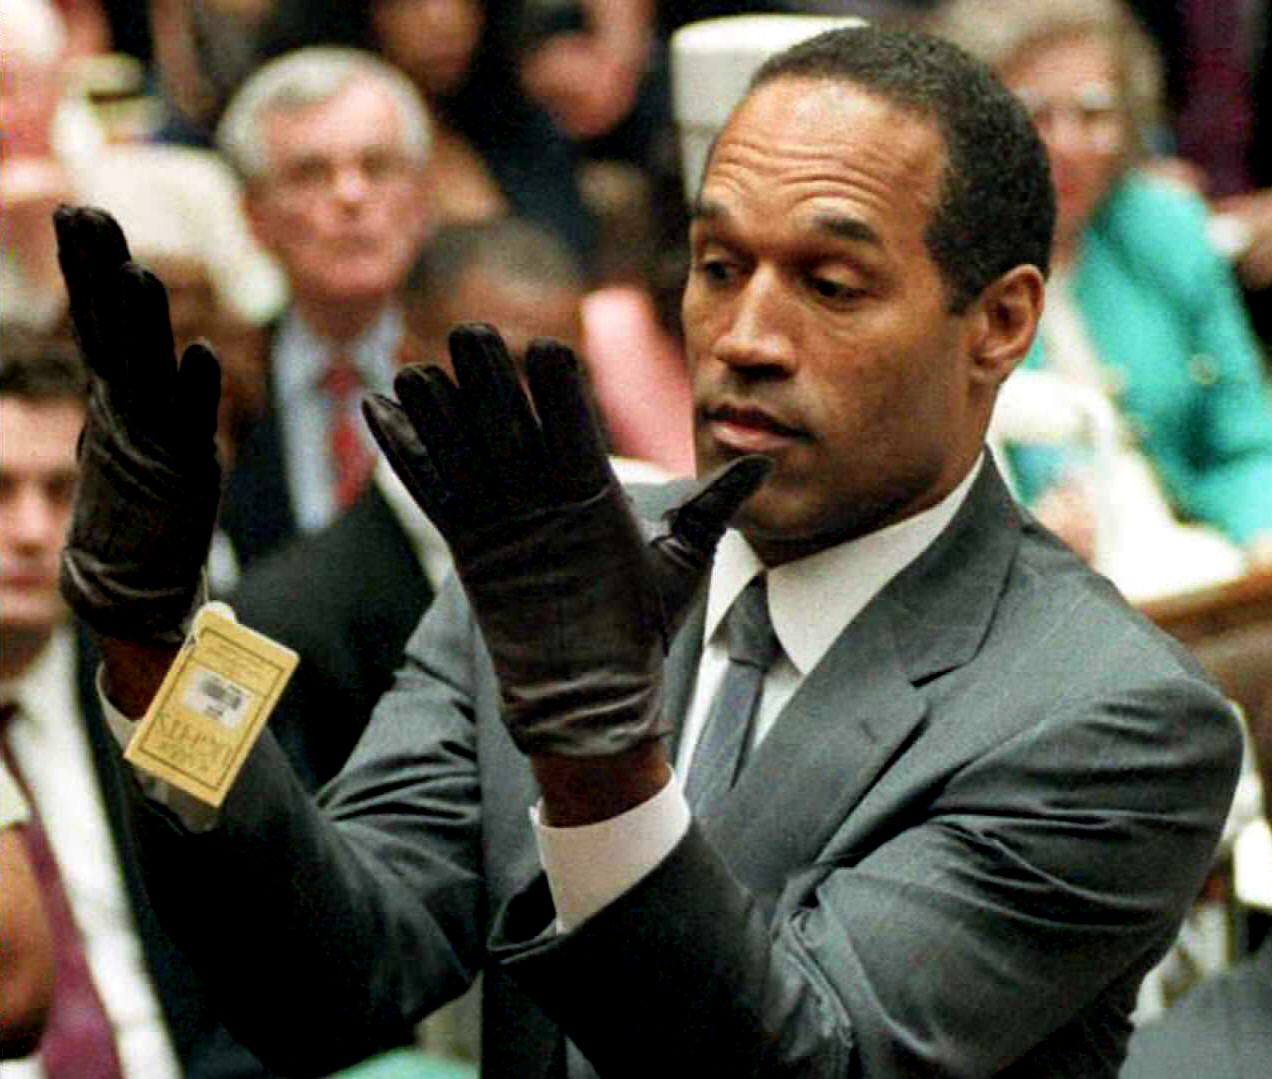 Key moments from the O.J. Simpson trial |